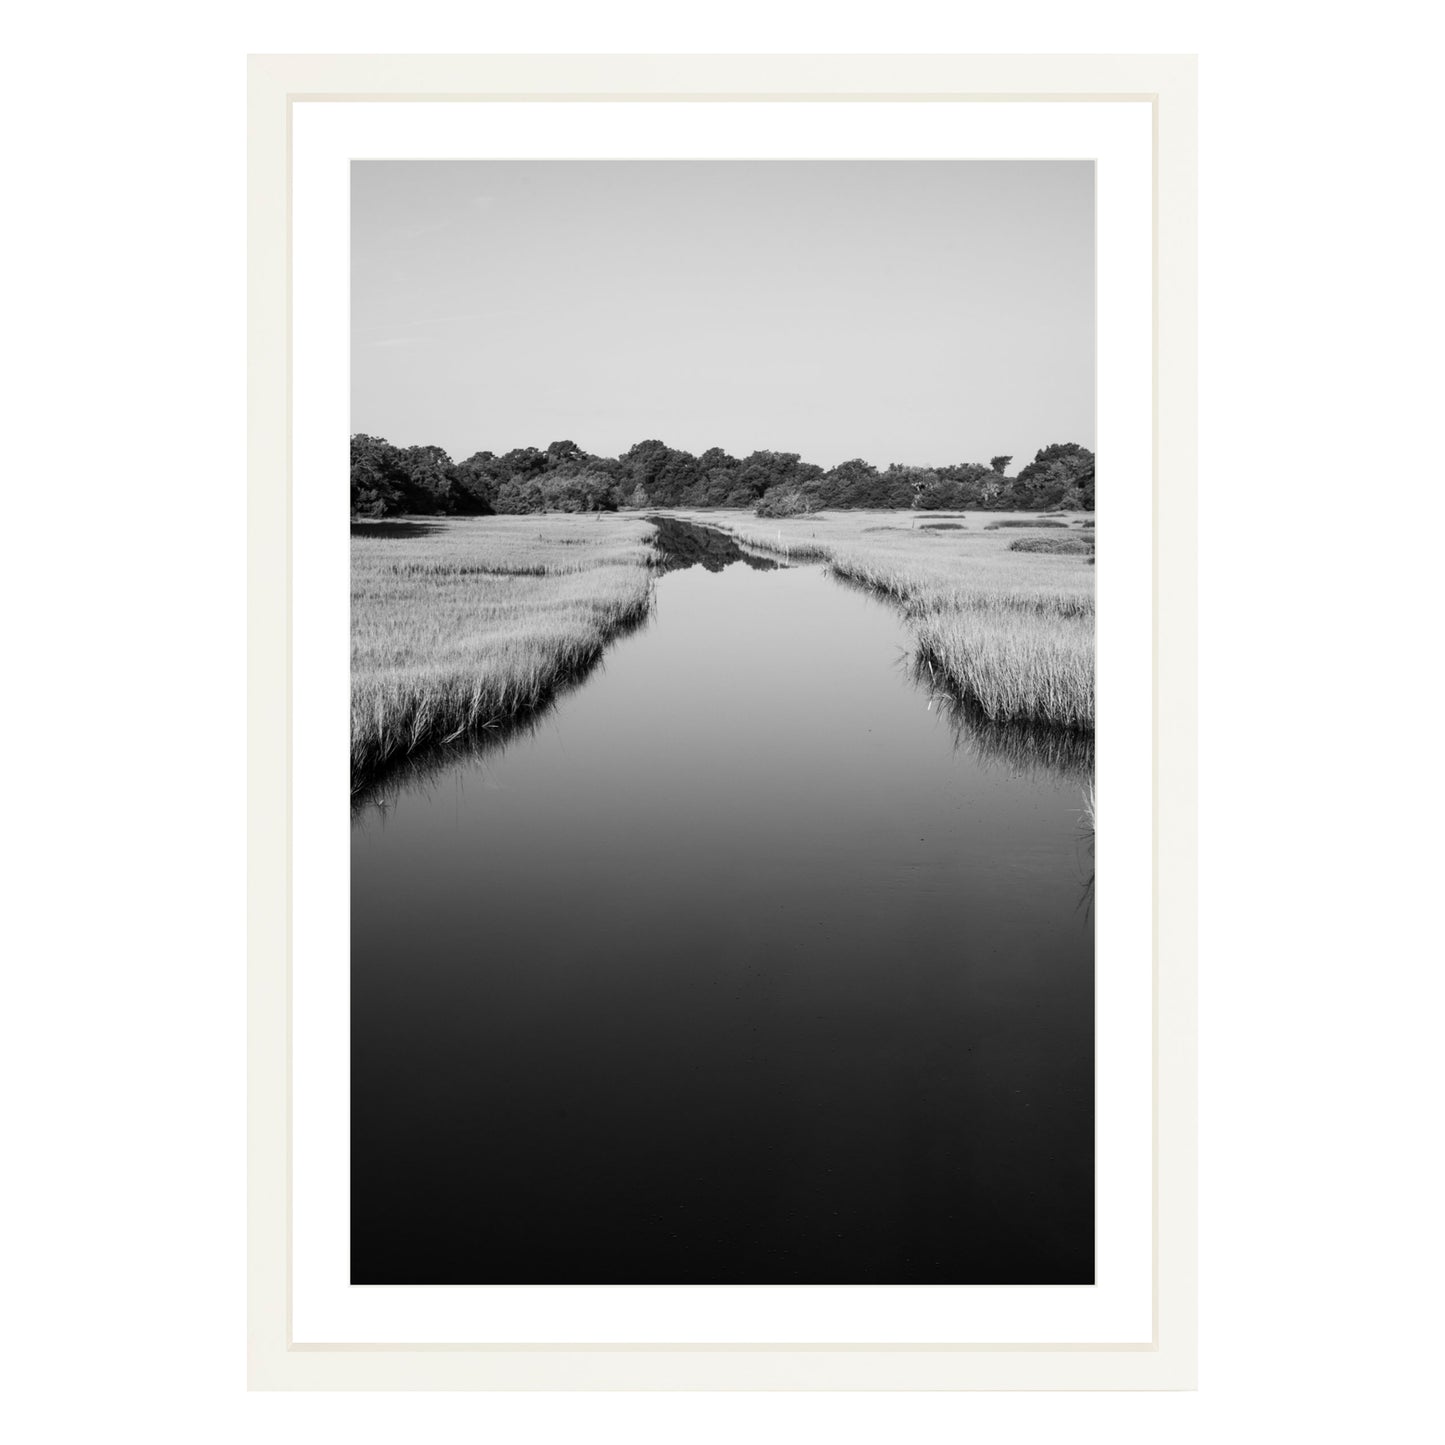 Black and white photograph of a marsh stream on Kiawah Island, South Carolina framed in white with white mat